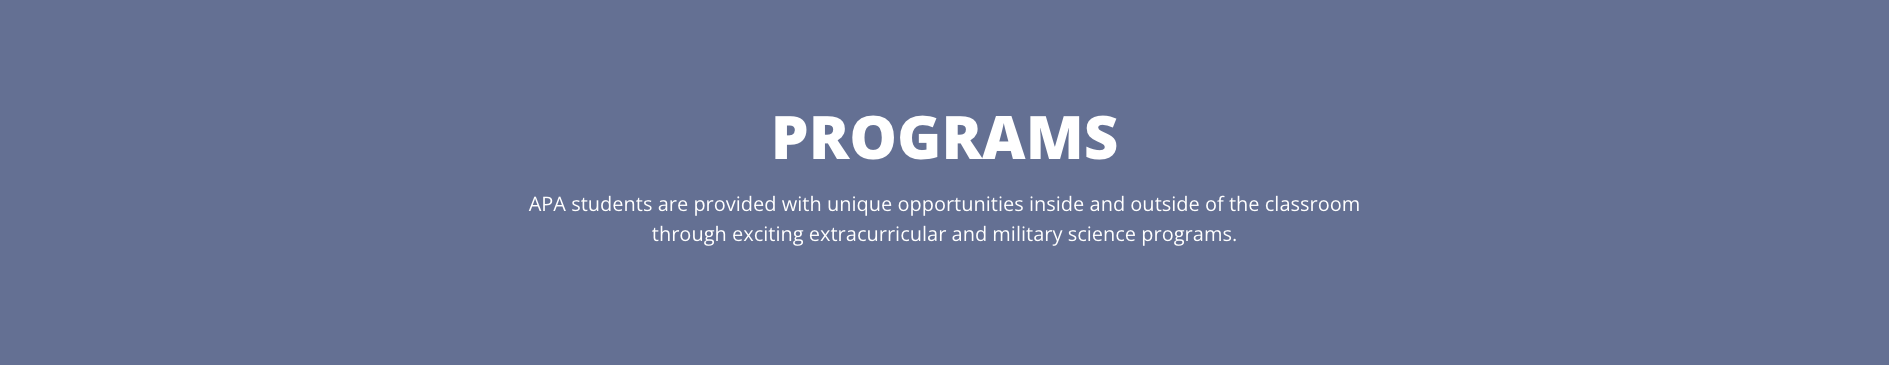 programs APA students are provided with unique opportunities inside and outside of the classroom through exciting extracurricular and military science programs.